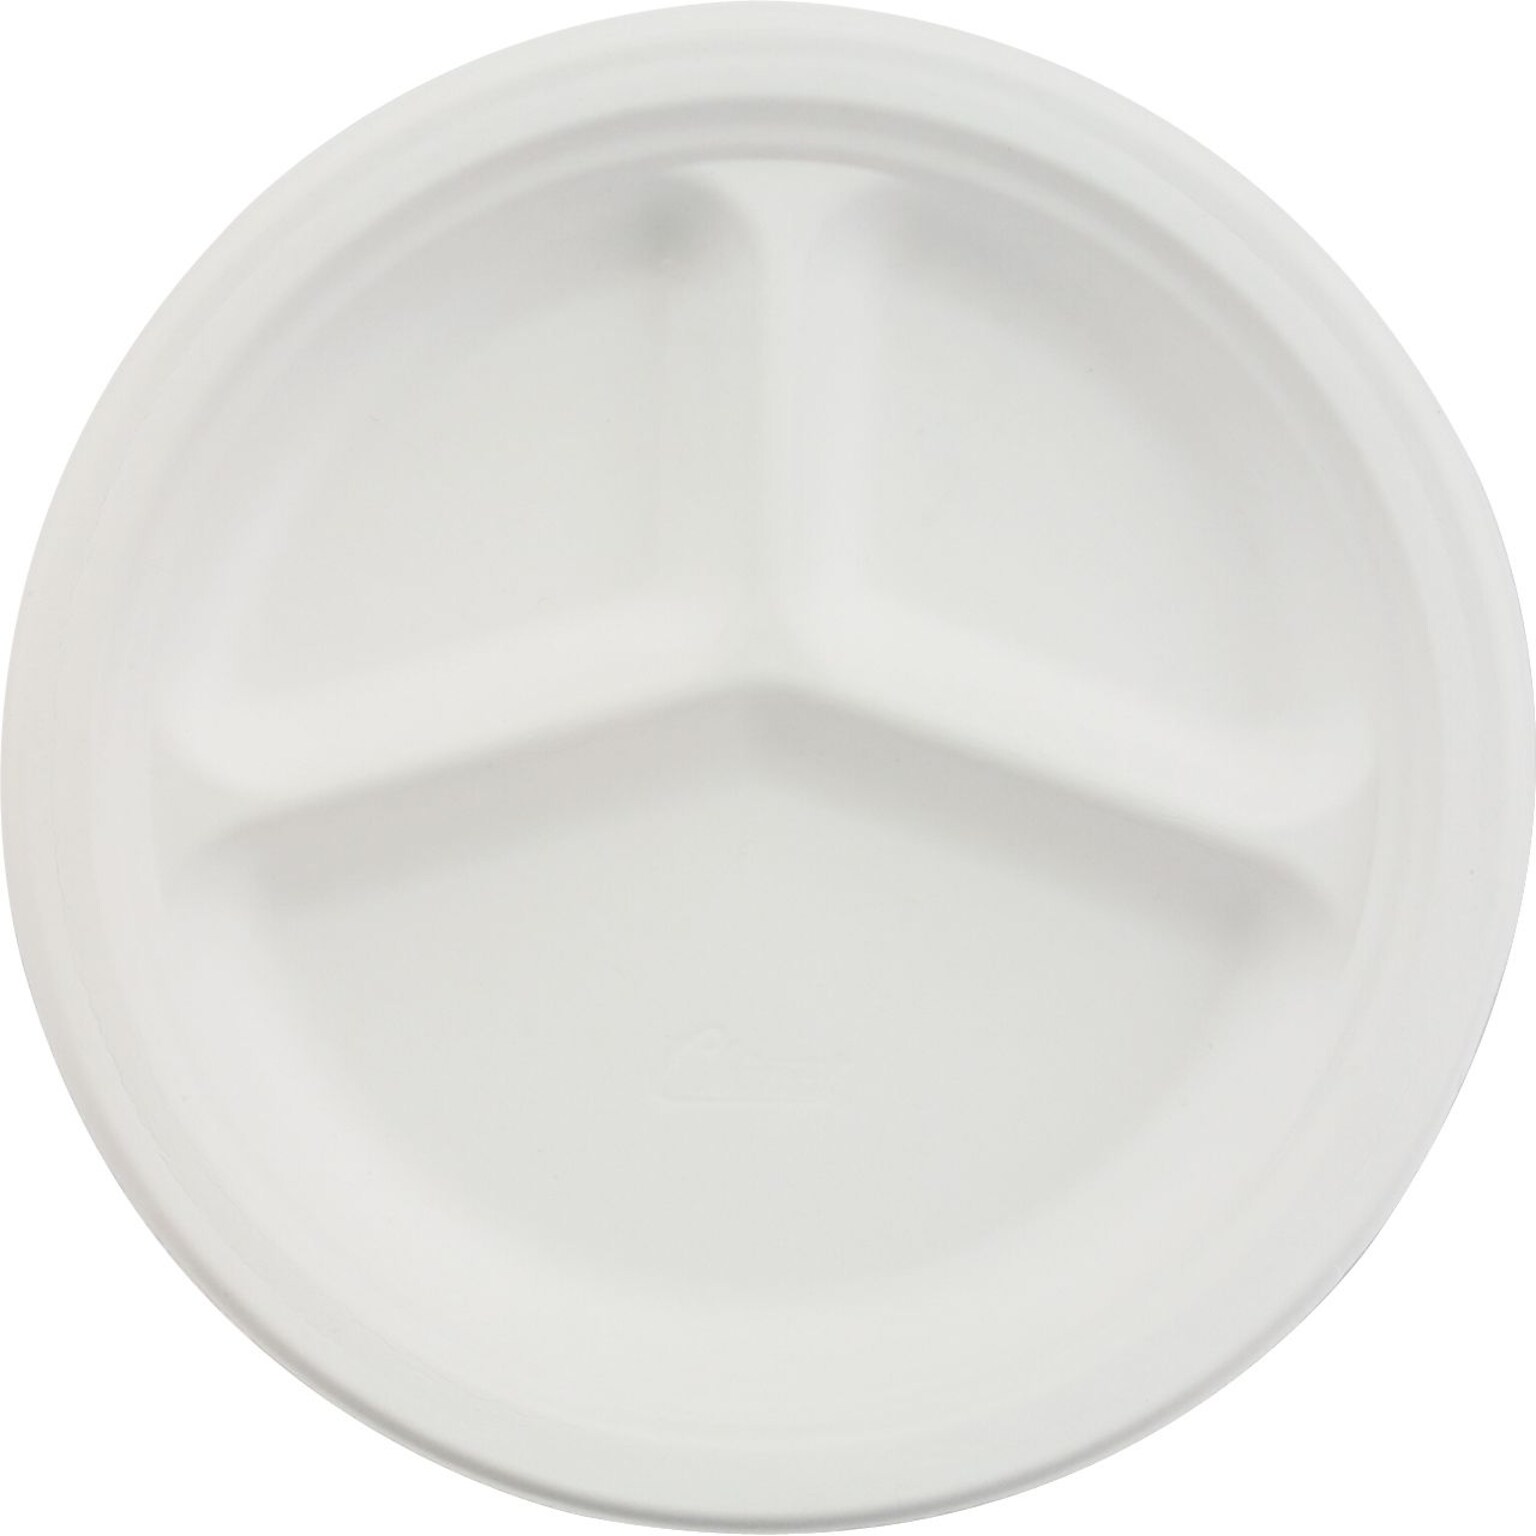 Chinet® Classic Paper Plates; Three Compartments, 10-1/4 Diameter, 500/Case